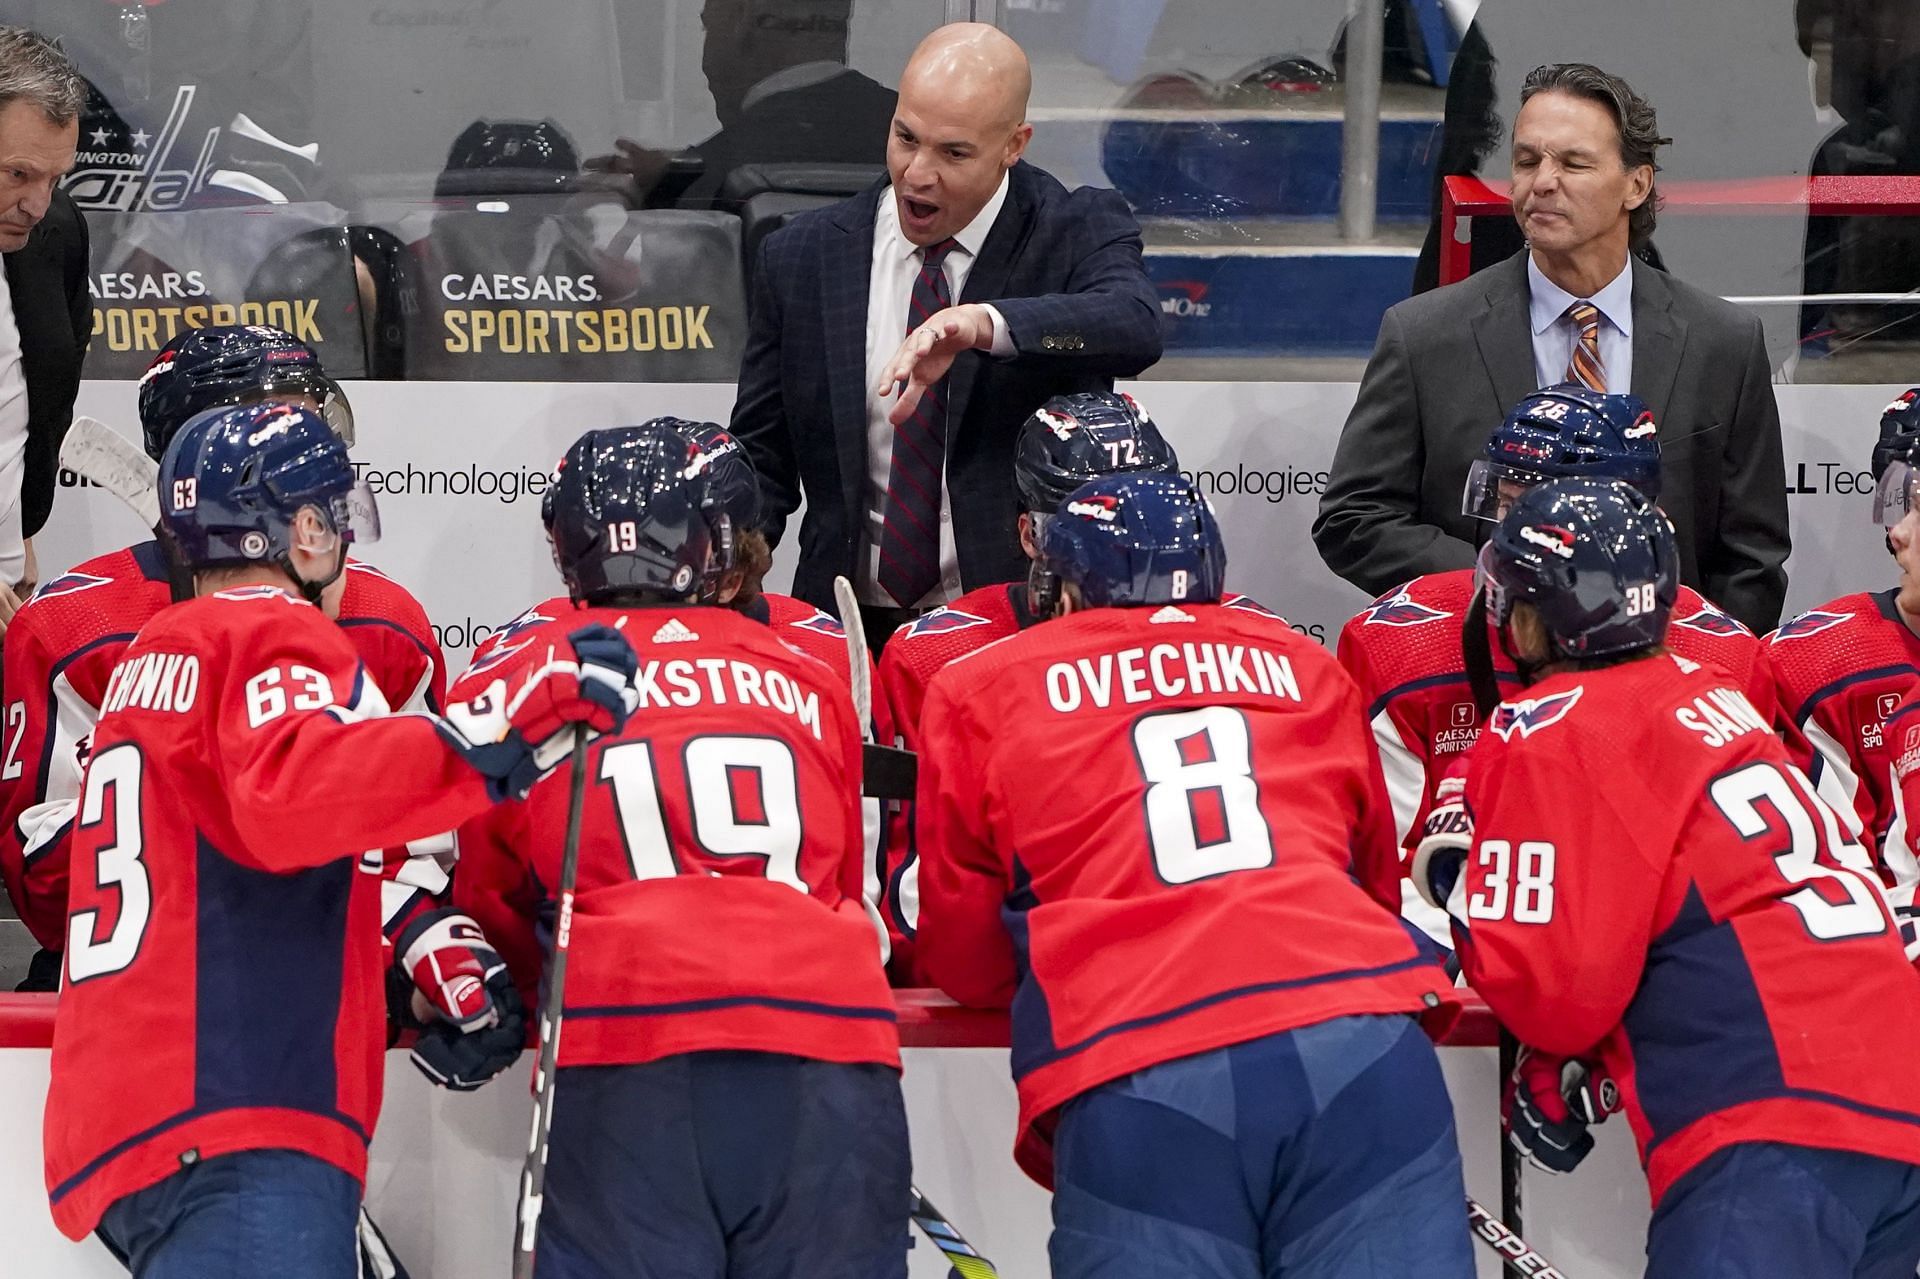 A first look at the Capitals' Alex Ovechkin and Nicklas Backstrom